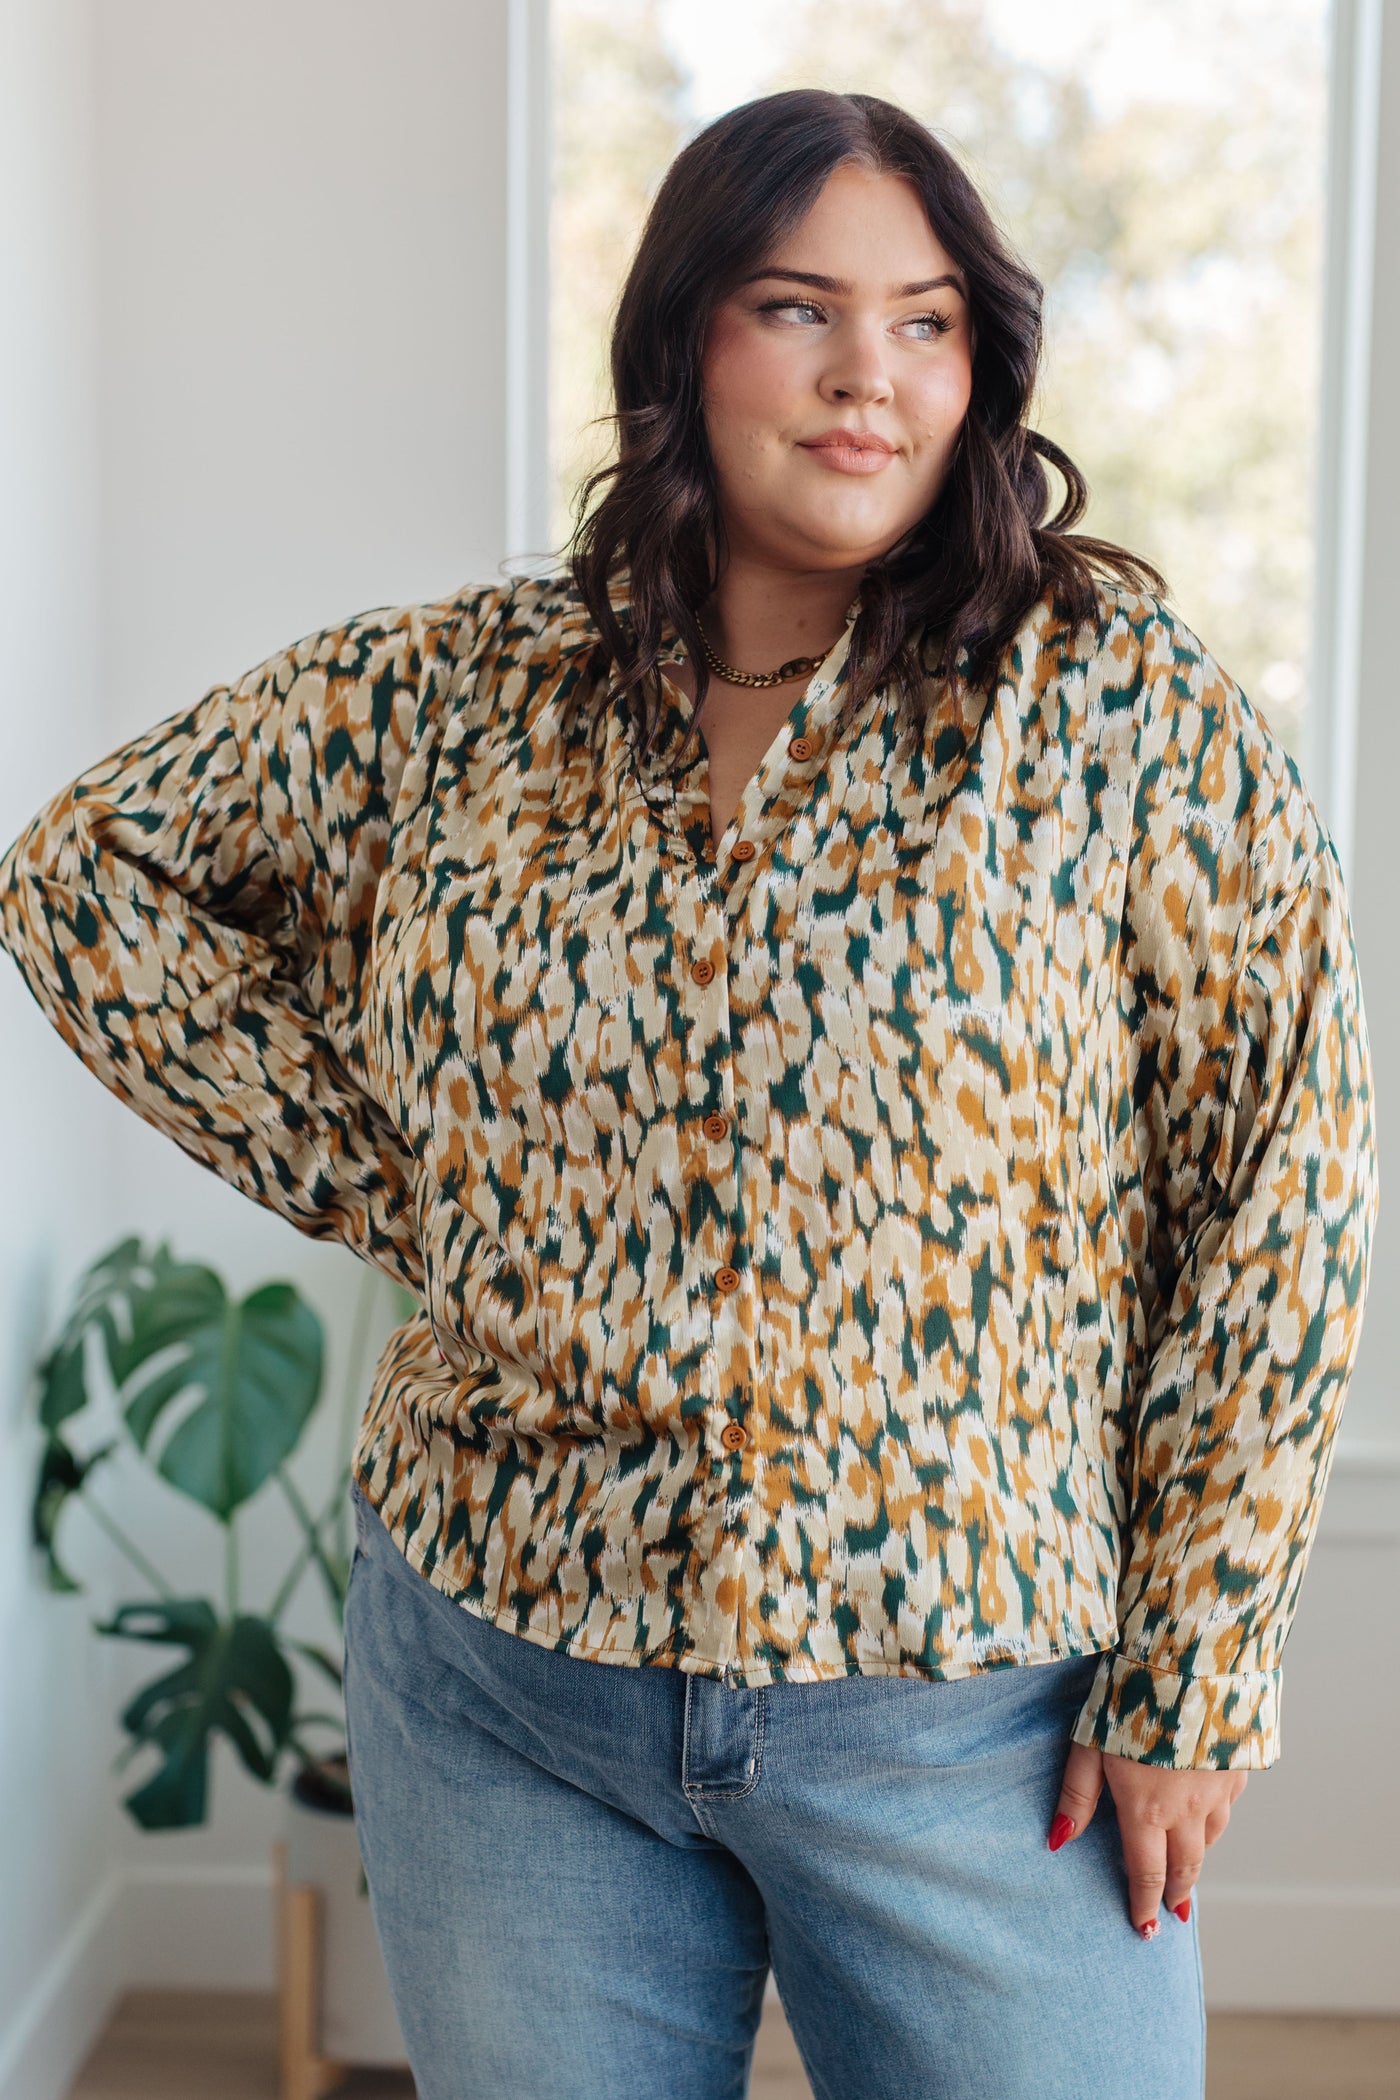 Introducing the In the Willows Button Up Blouse: created from luxurious poly satin for a stunning look that will have you feeling as confident as ever